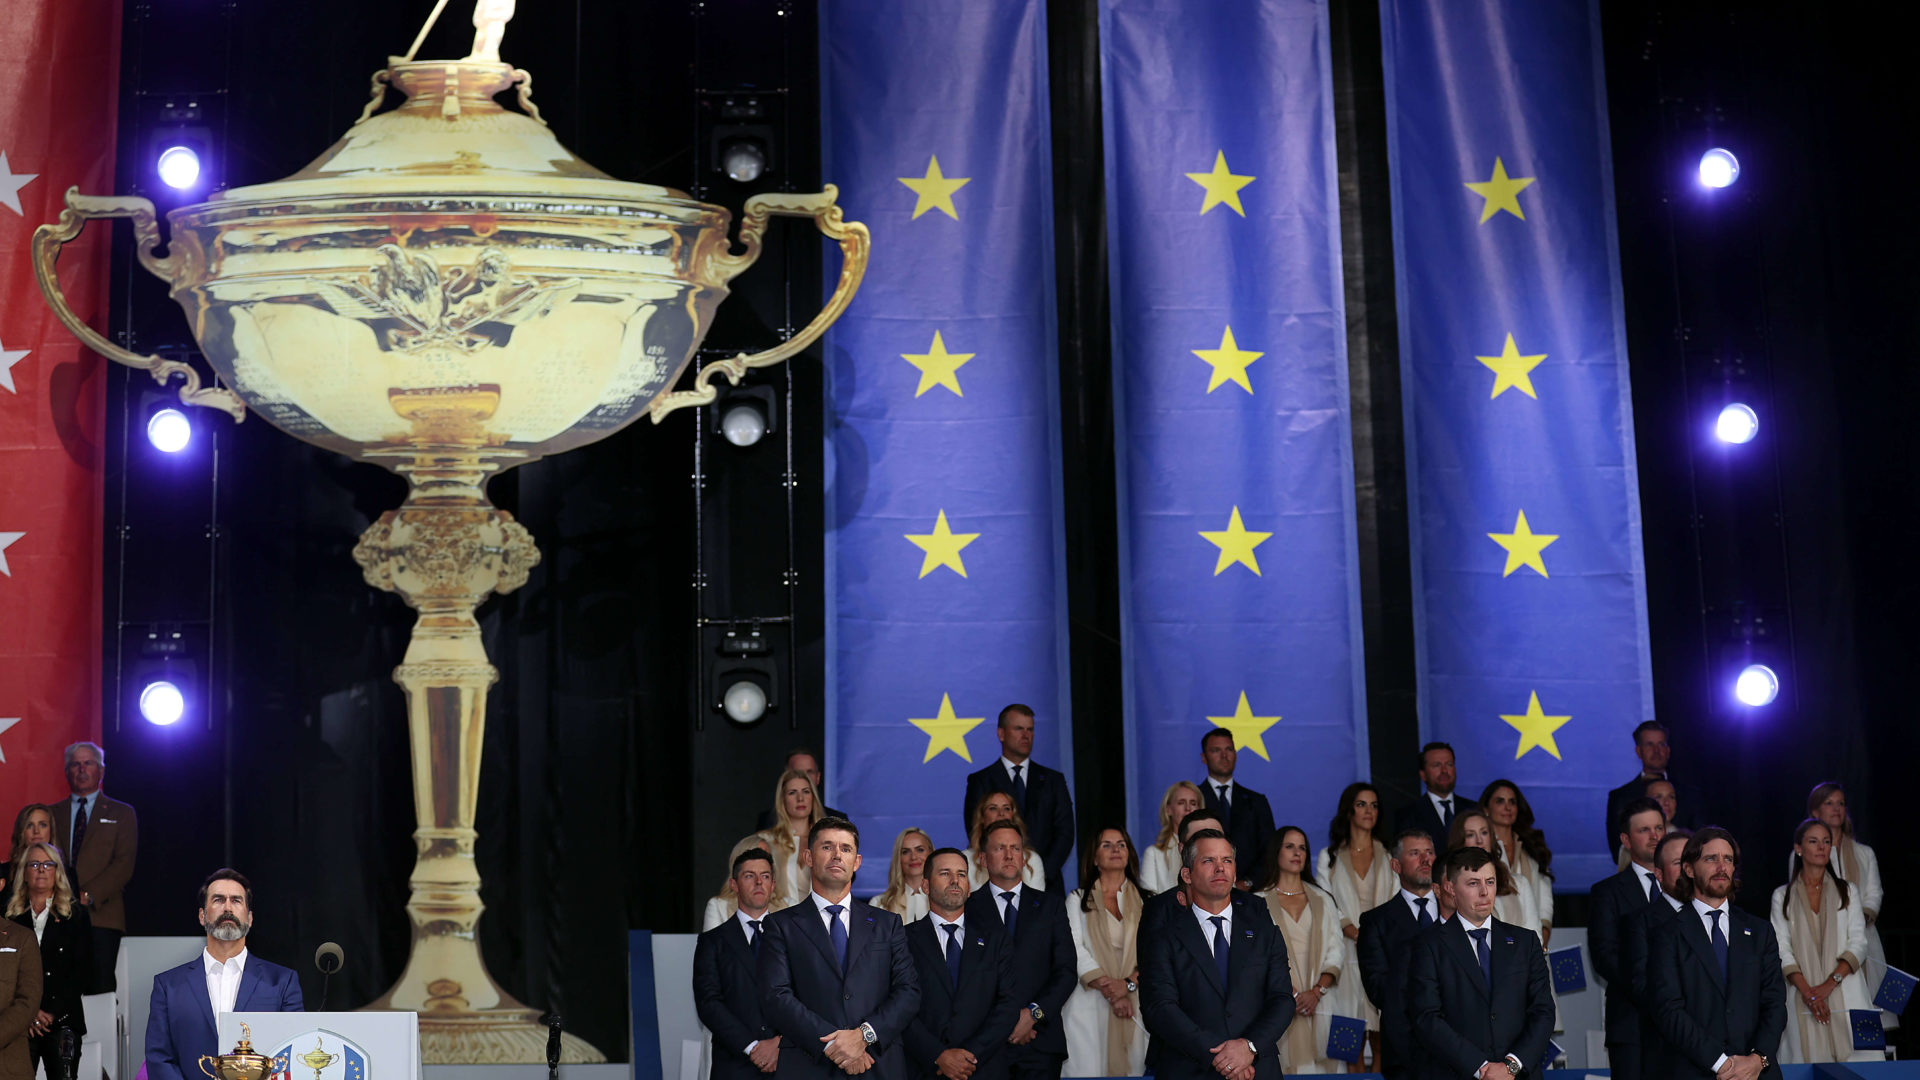 KOHLER, WISCONSIN - SEPTEMBER 23: Team Europe and their partners attend the opening ceremony for the 43rd Ryder Cup at Whistling Straits on September 23, 2021 in Kohler, Wisconsin.